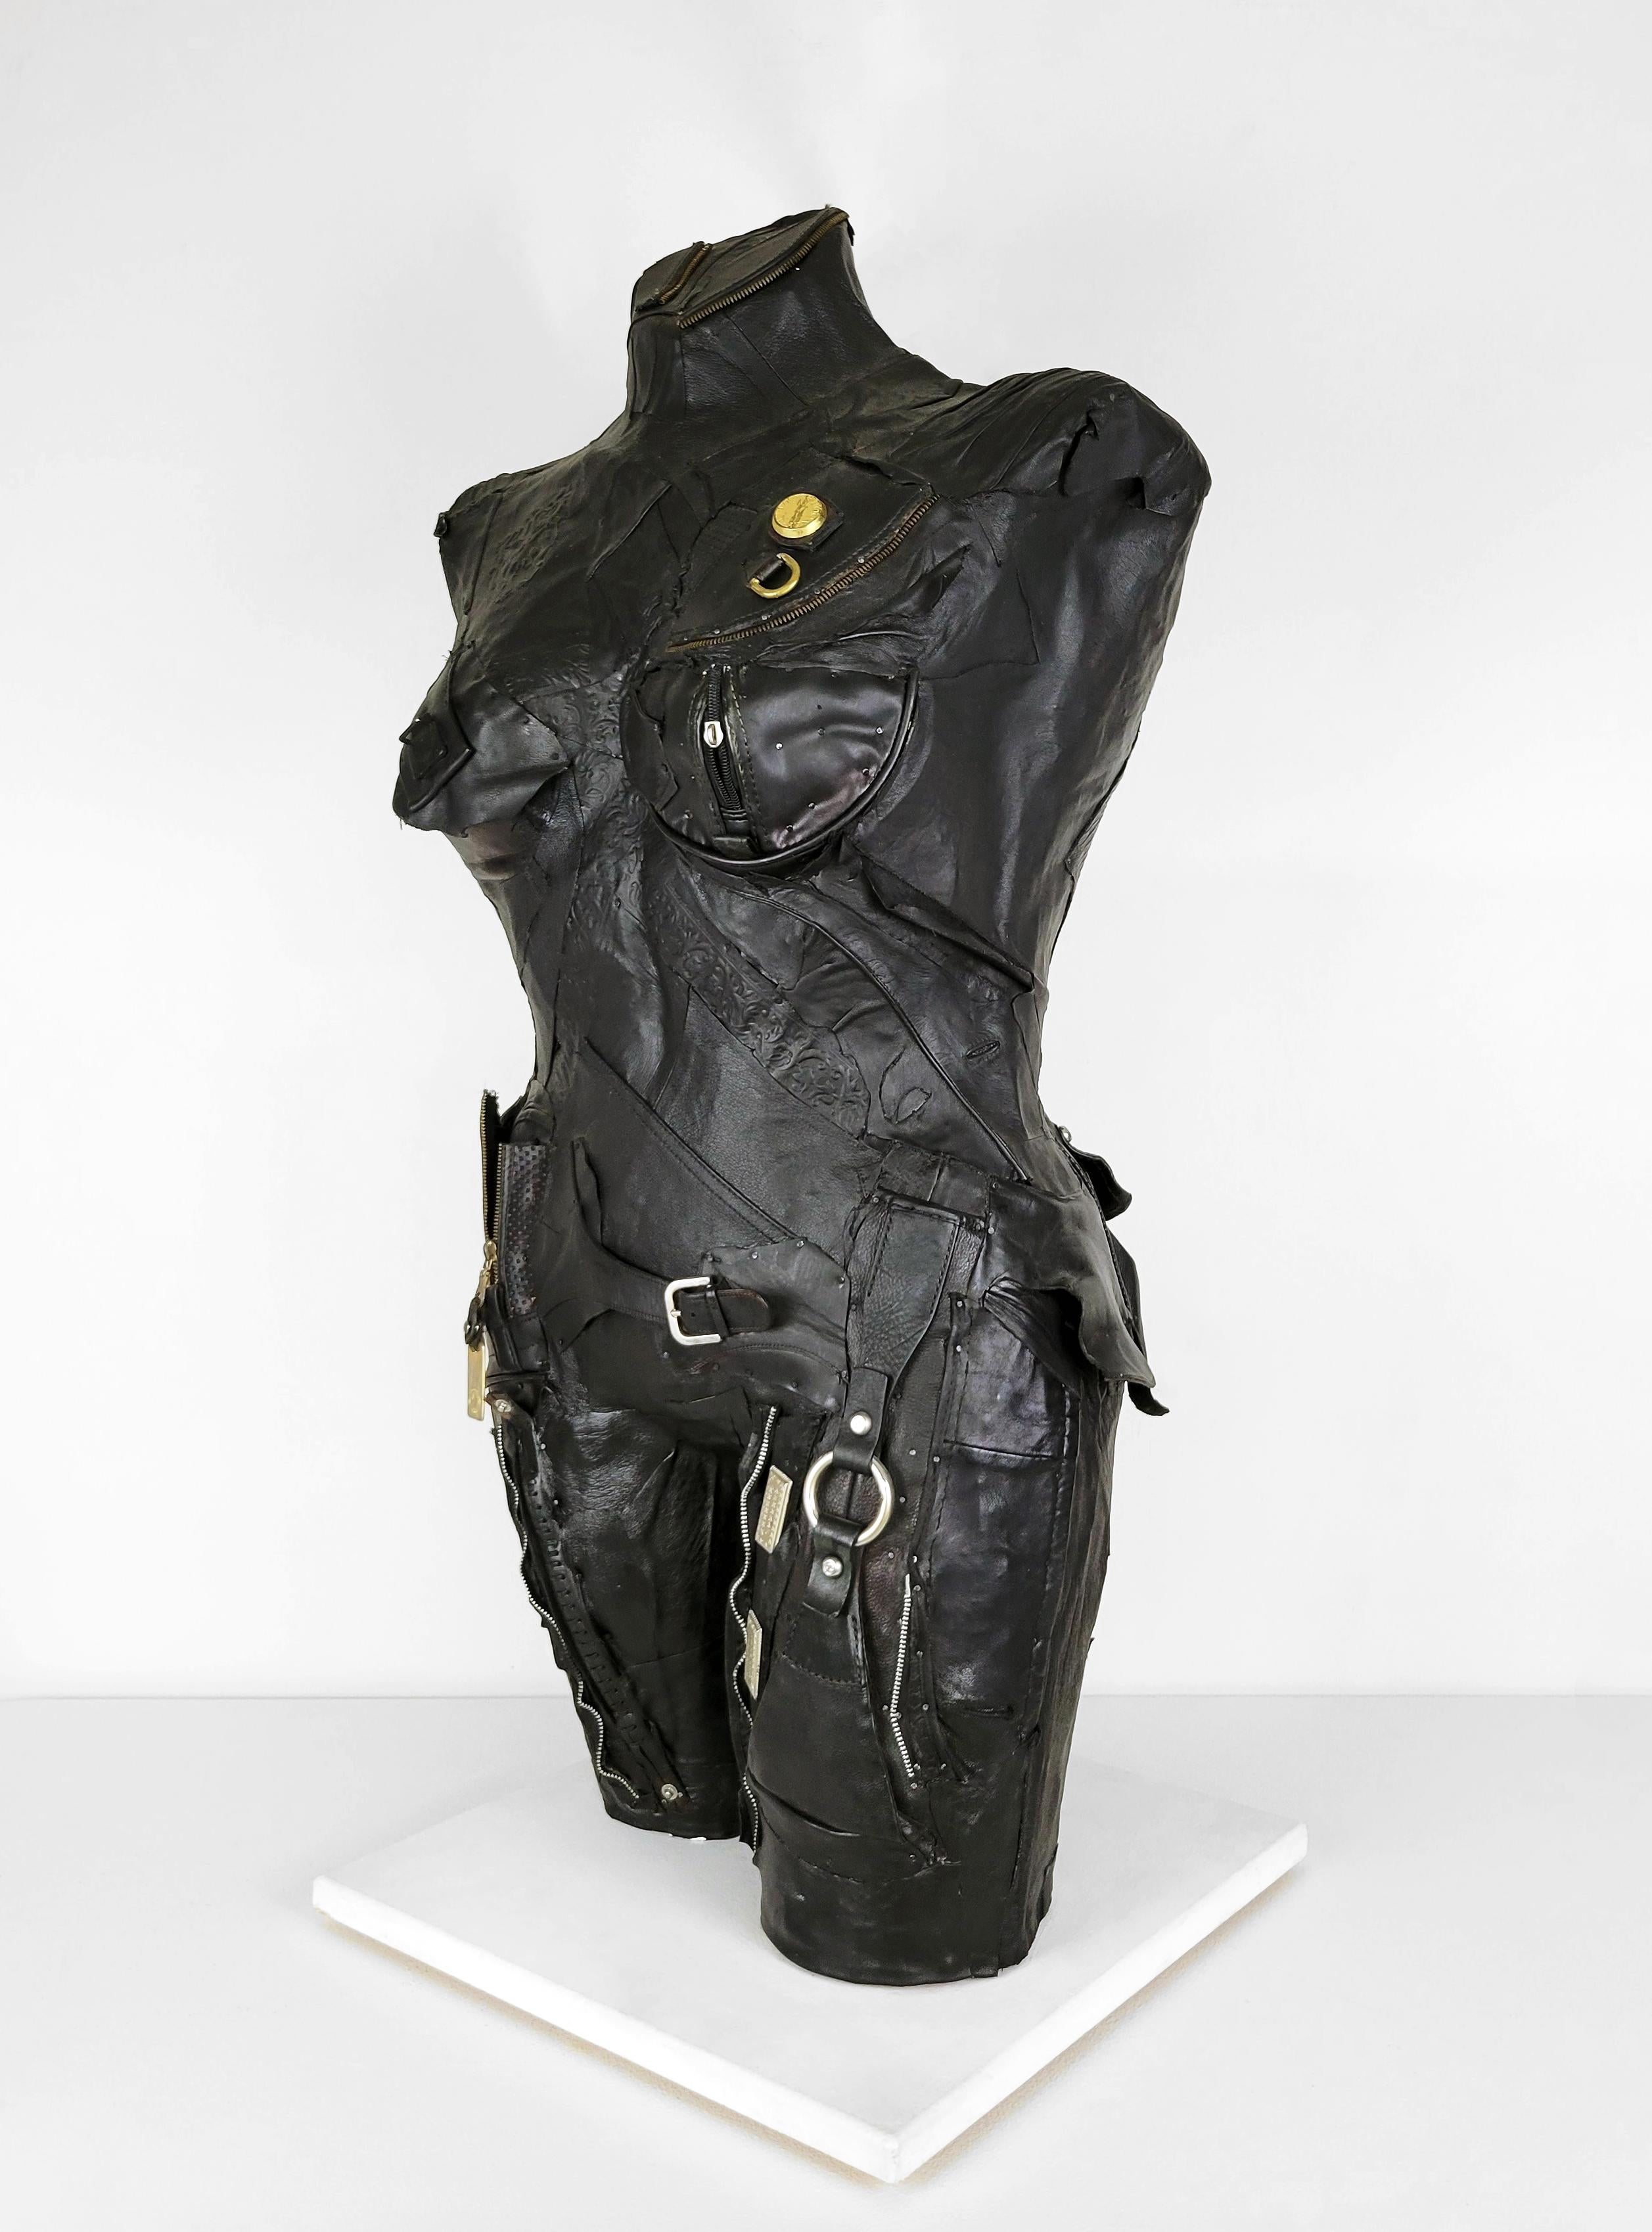 Linda Stein, Defender 696 - Feminist Contemporary Black/Silver Leather Metal Torso Sculpture 

Starting in 2007, the artist Linda Stein began to explore gender multiplicities and diversities in her sculptural series The Fluidity of Gender.  The